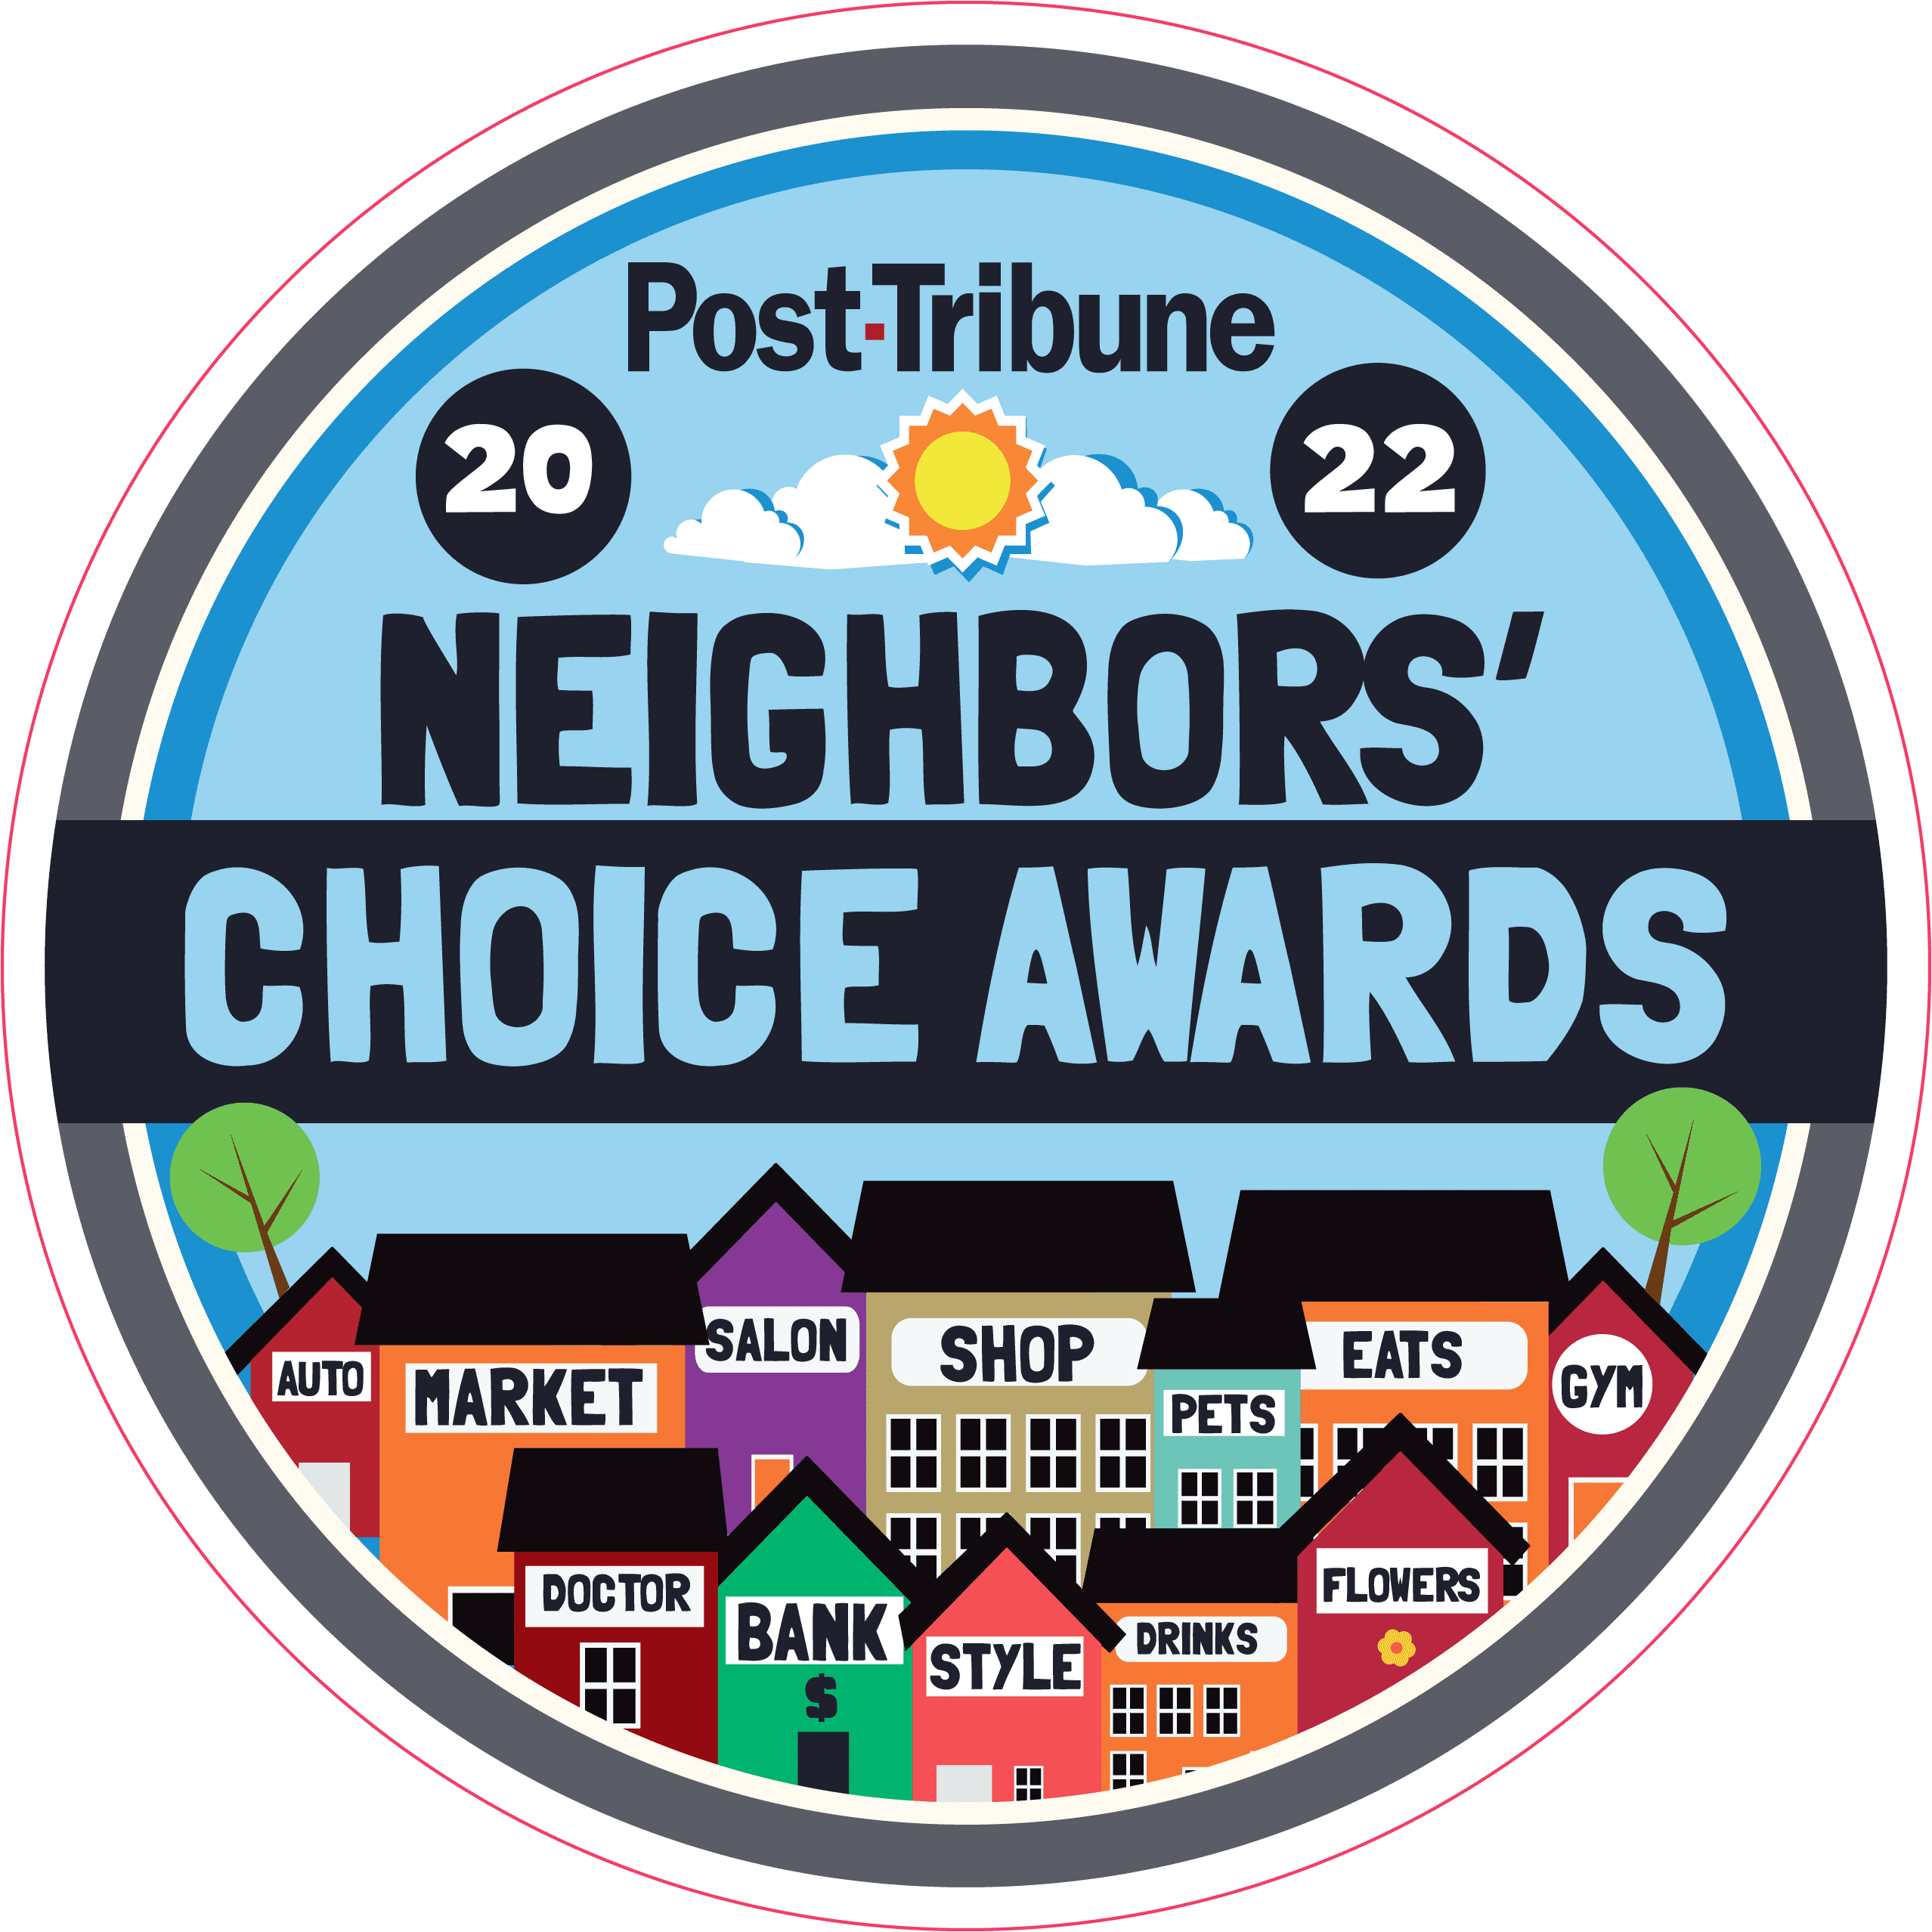 Pinnacle Hospital voted Top Urgent Care in the area for the 2022 Neighbors' Choice Awards!